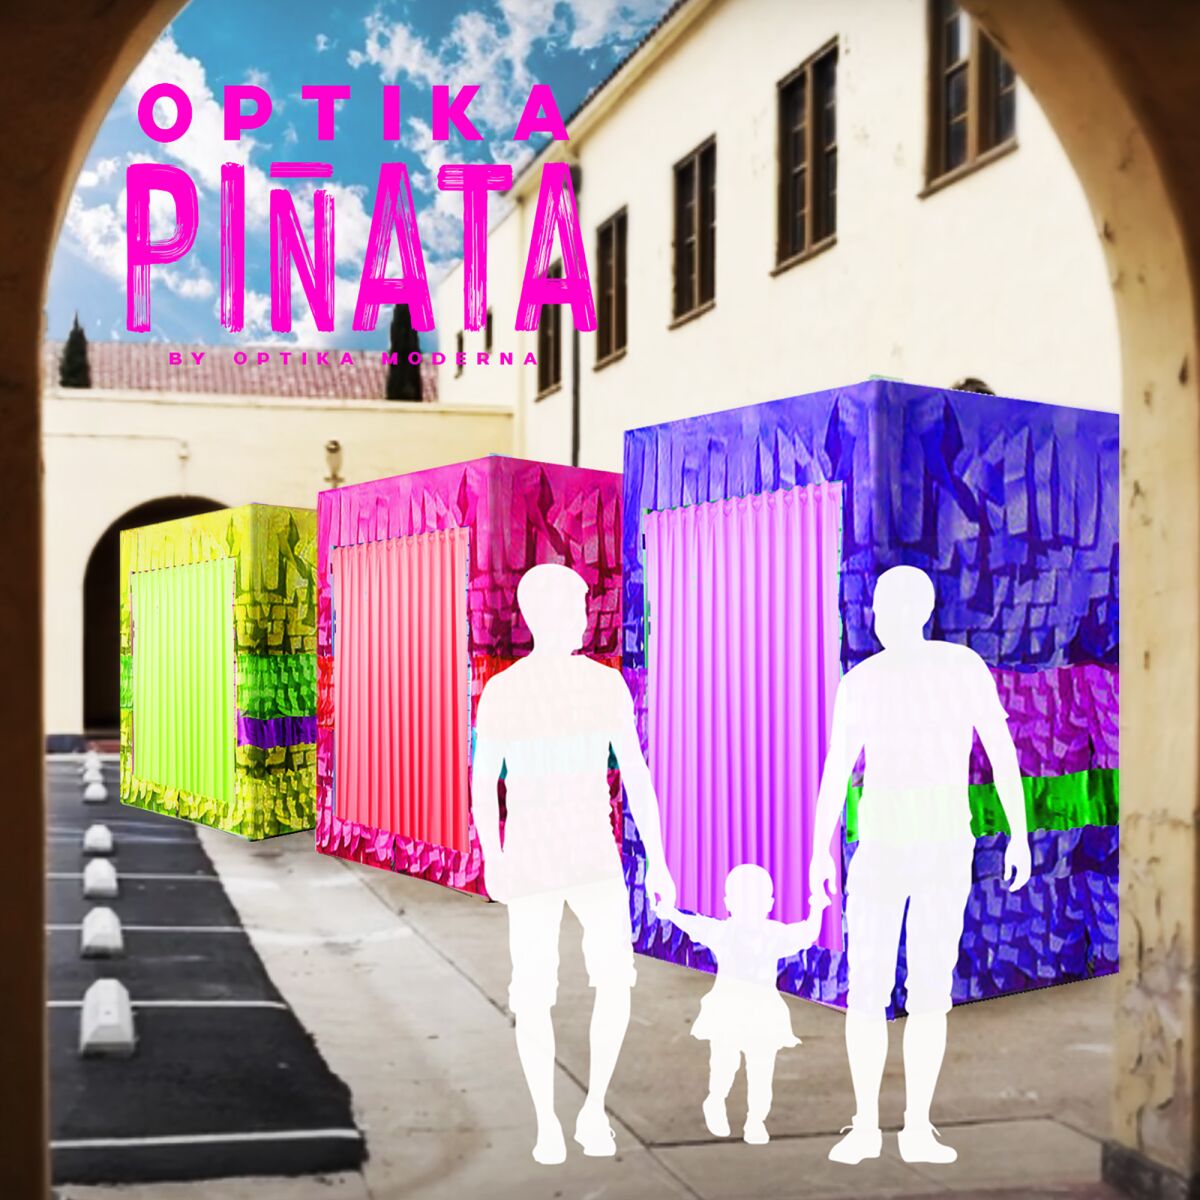 Optika Pinata will take place Aug. 14-15 at Liberty Station as part of La Jolla Playhouse's Pop-Up WOW fest.